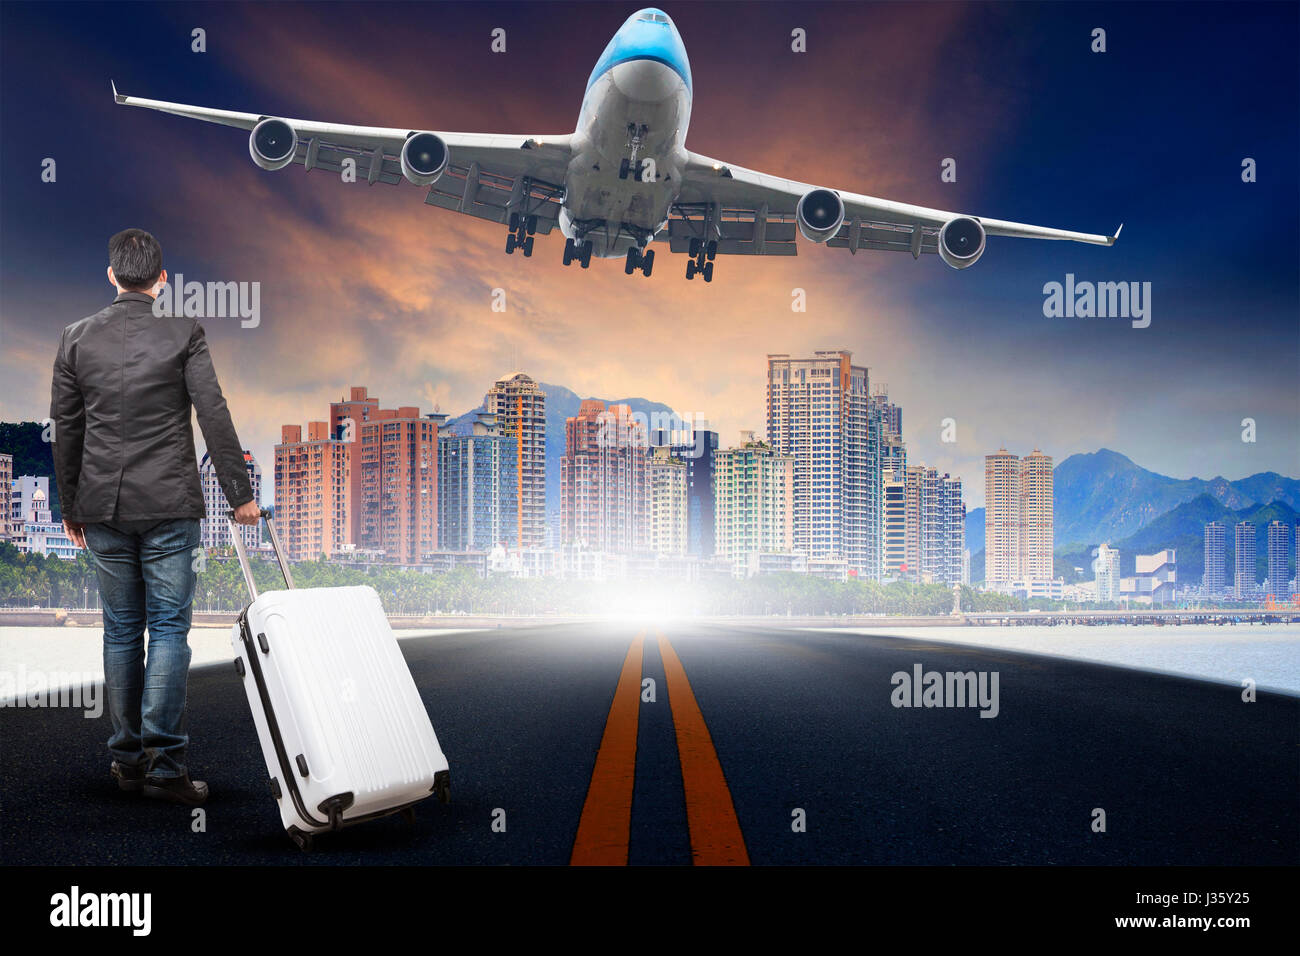 young man with belonging luggage standing  against urban scen and passenger jet plane flying over sky use for people traveling and aircraft transport  Stock Photo